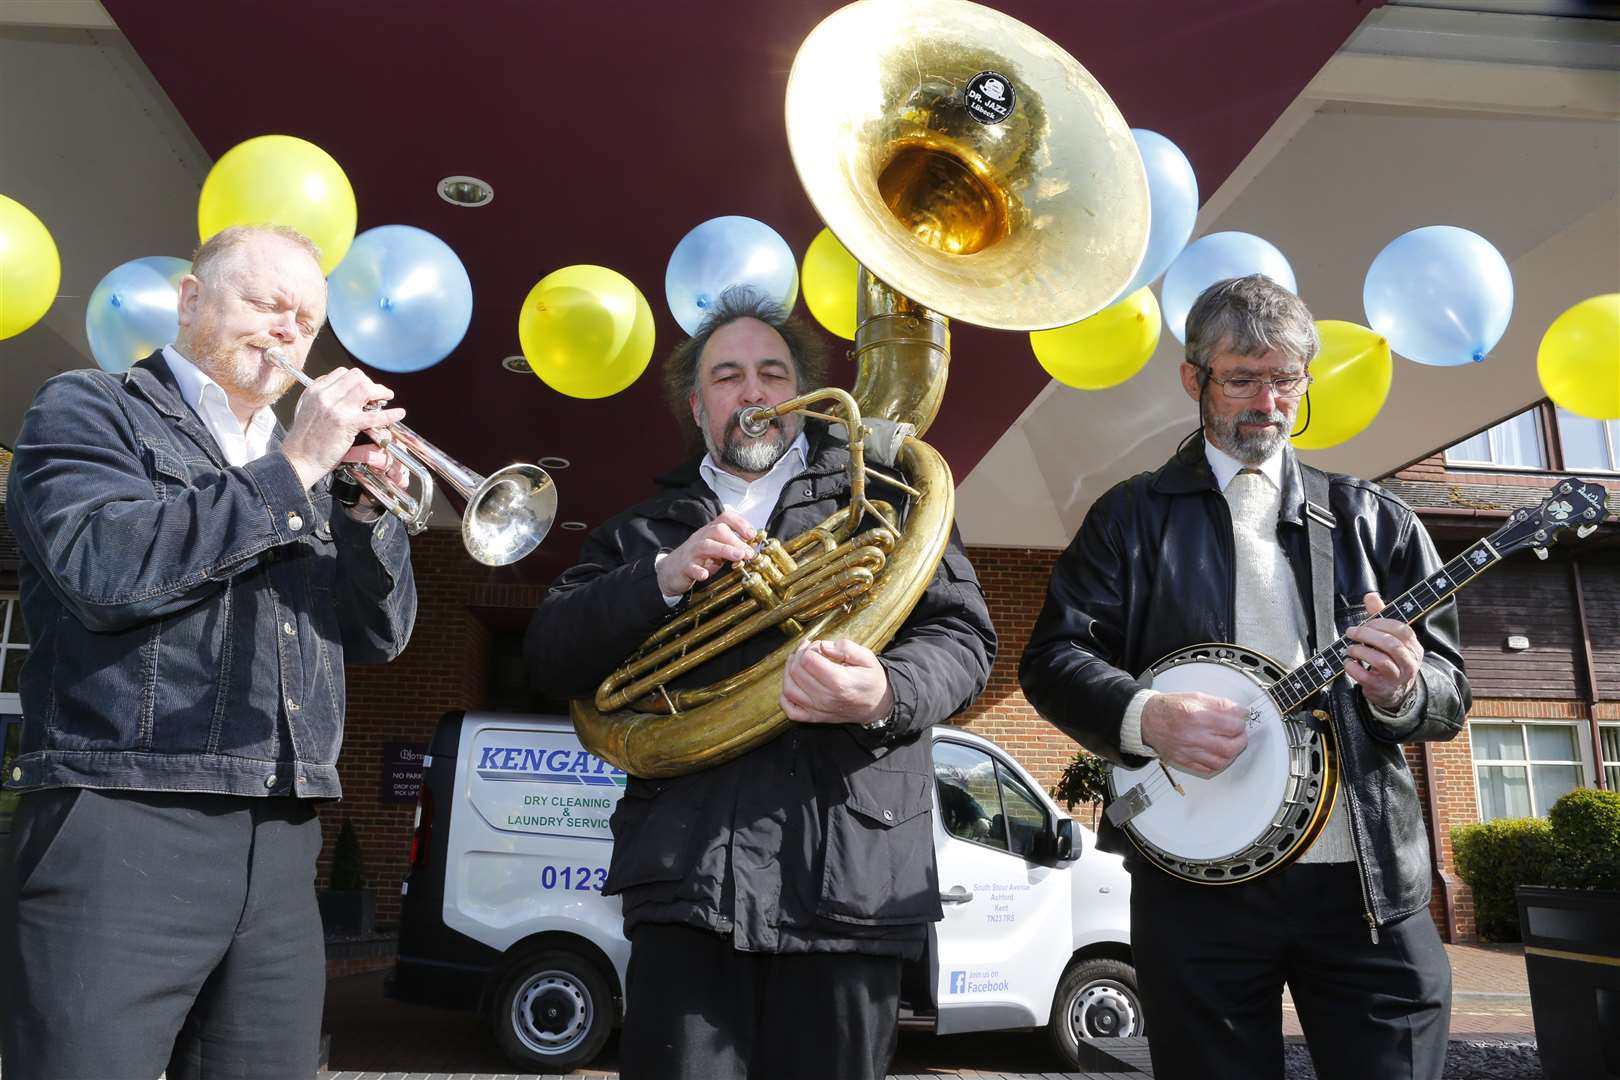 Visitors to Kent B2B got a warm welcome from the band